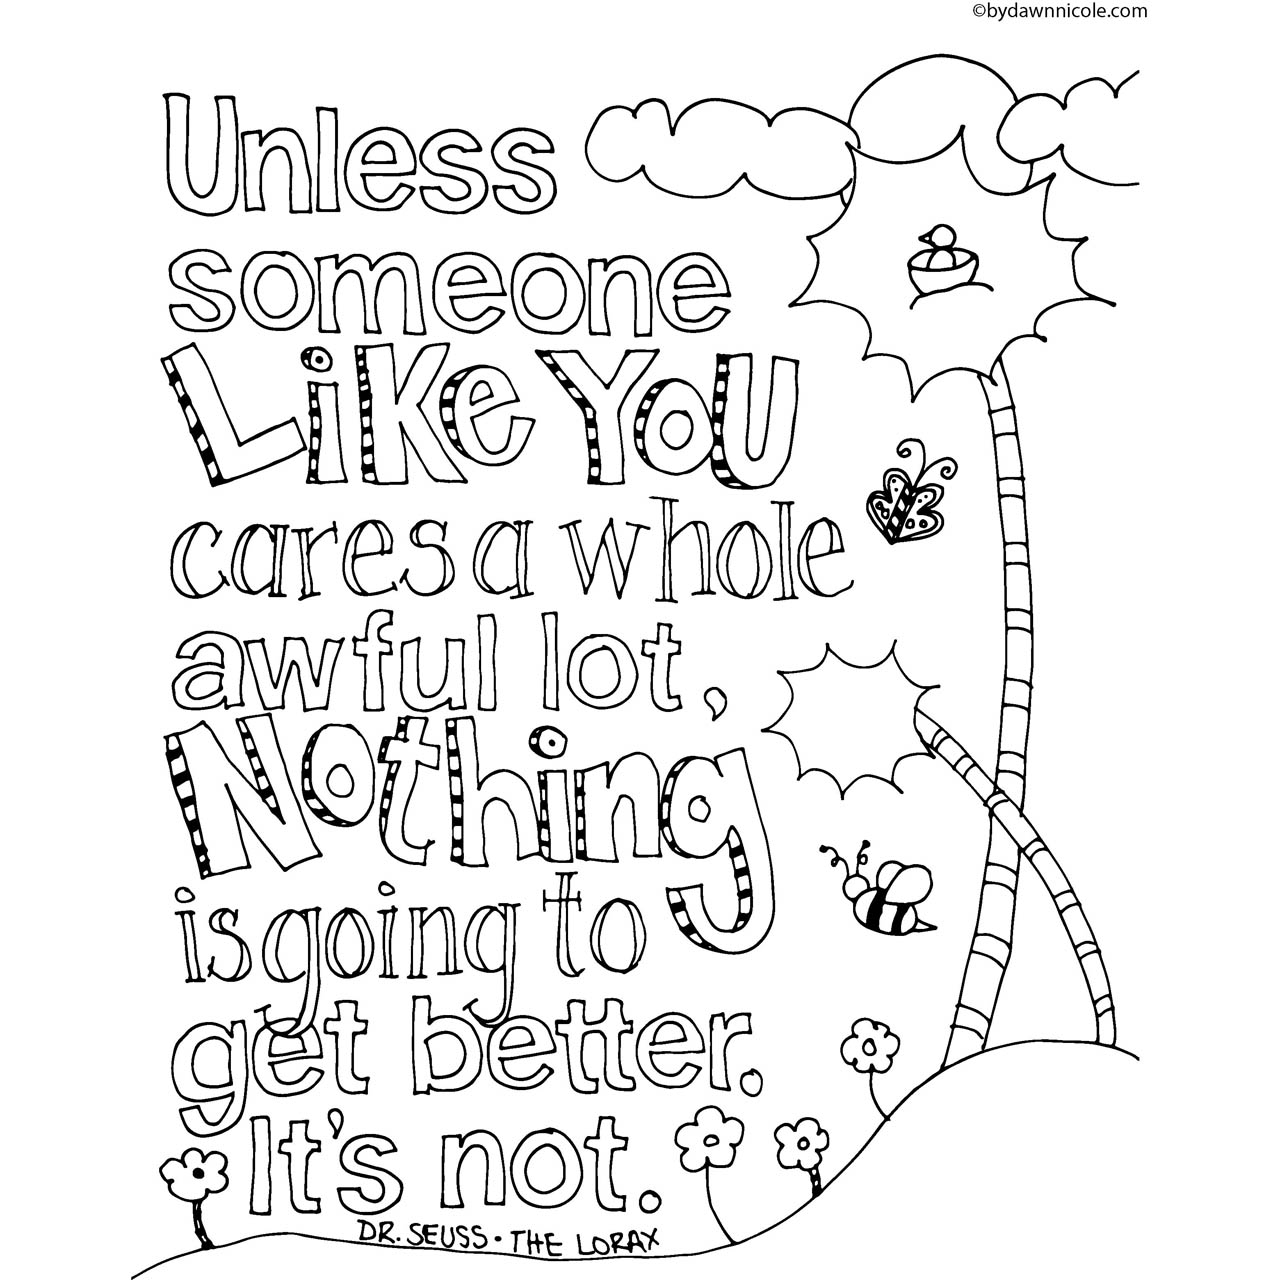 Free Dr Seuss Quotes Coloring Pages Unless Someone Like You Cares A Whole Awful Lot printable